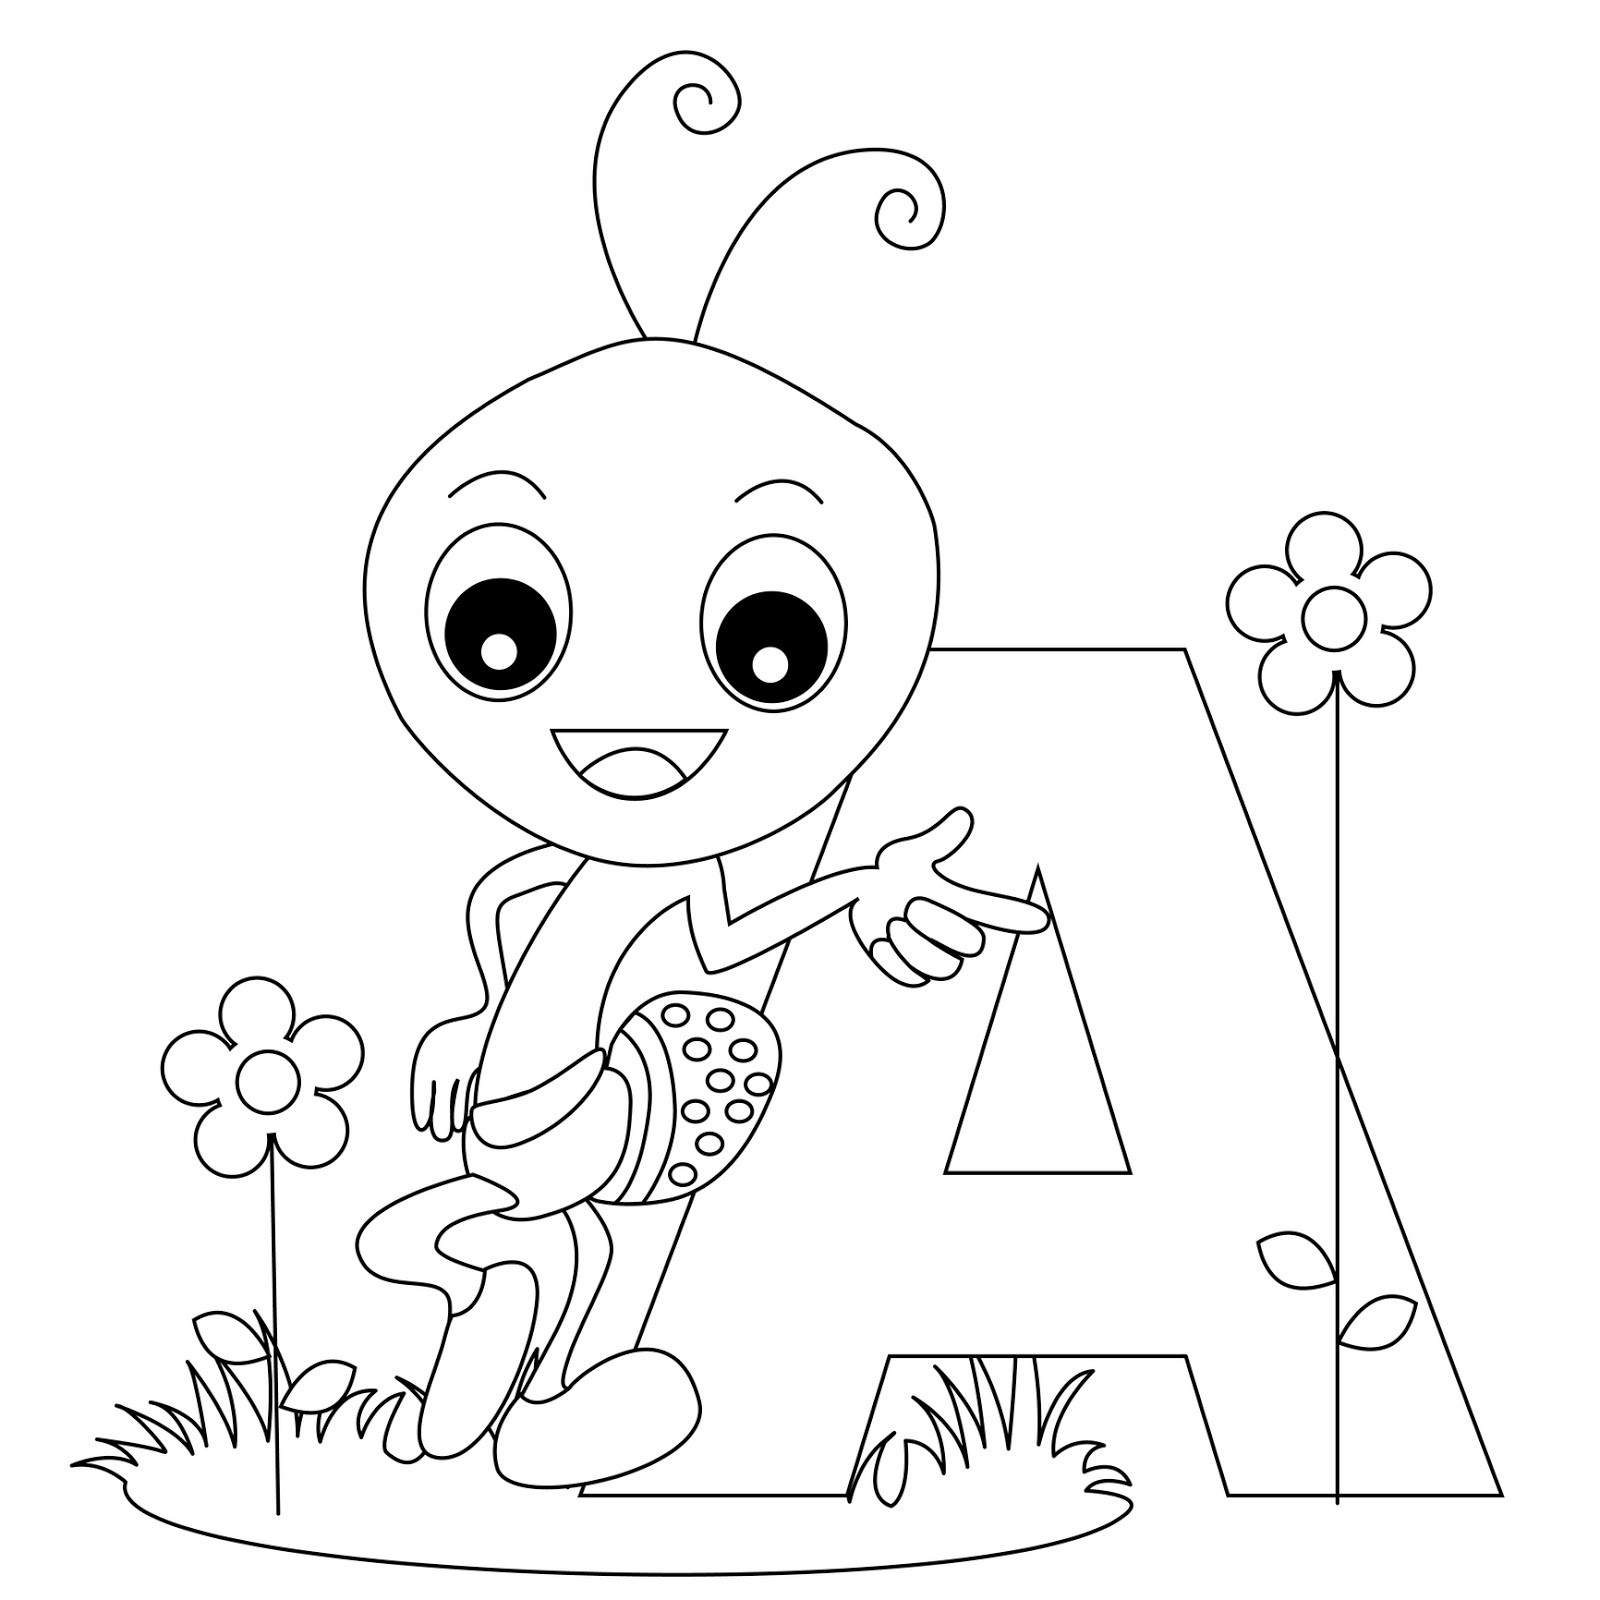 Alphabet Coloring Pages For Toddlers
 Animal Alphabet Letter A coloring Child Coloring